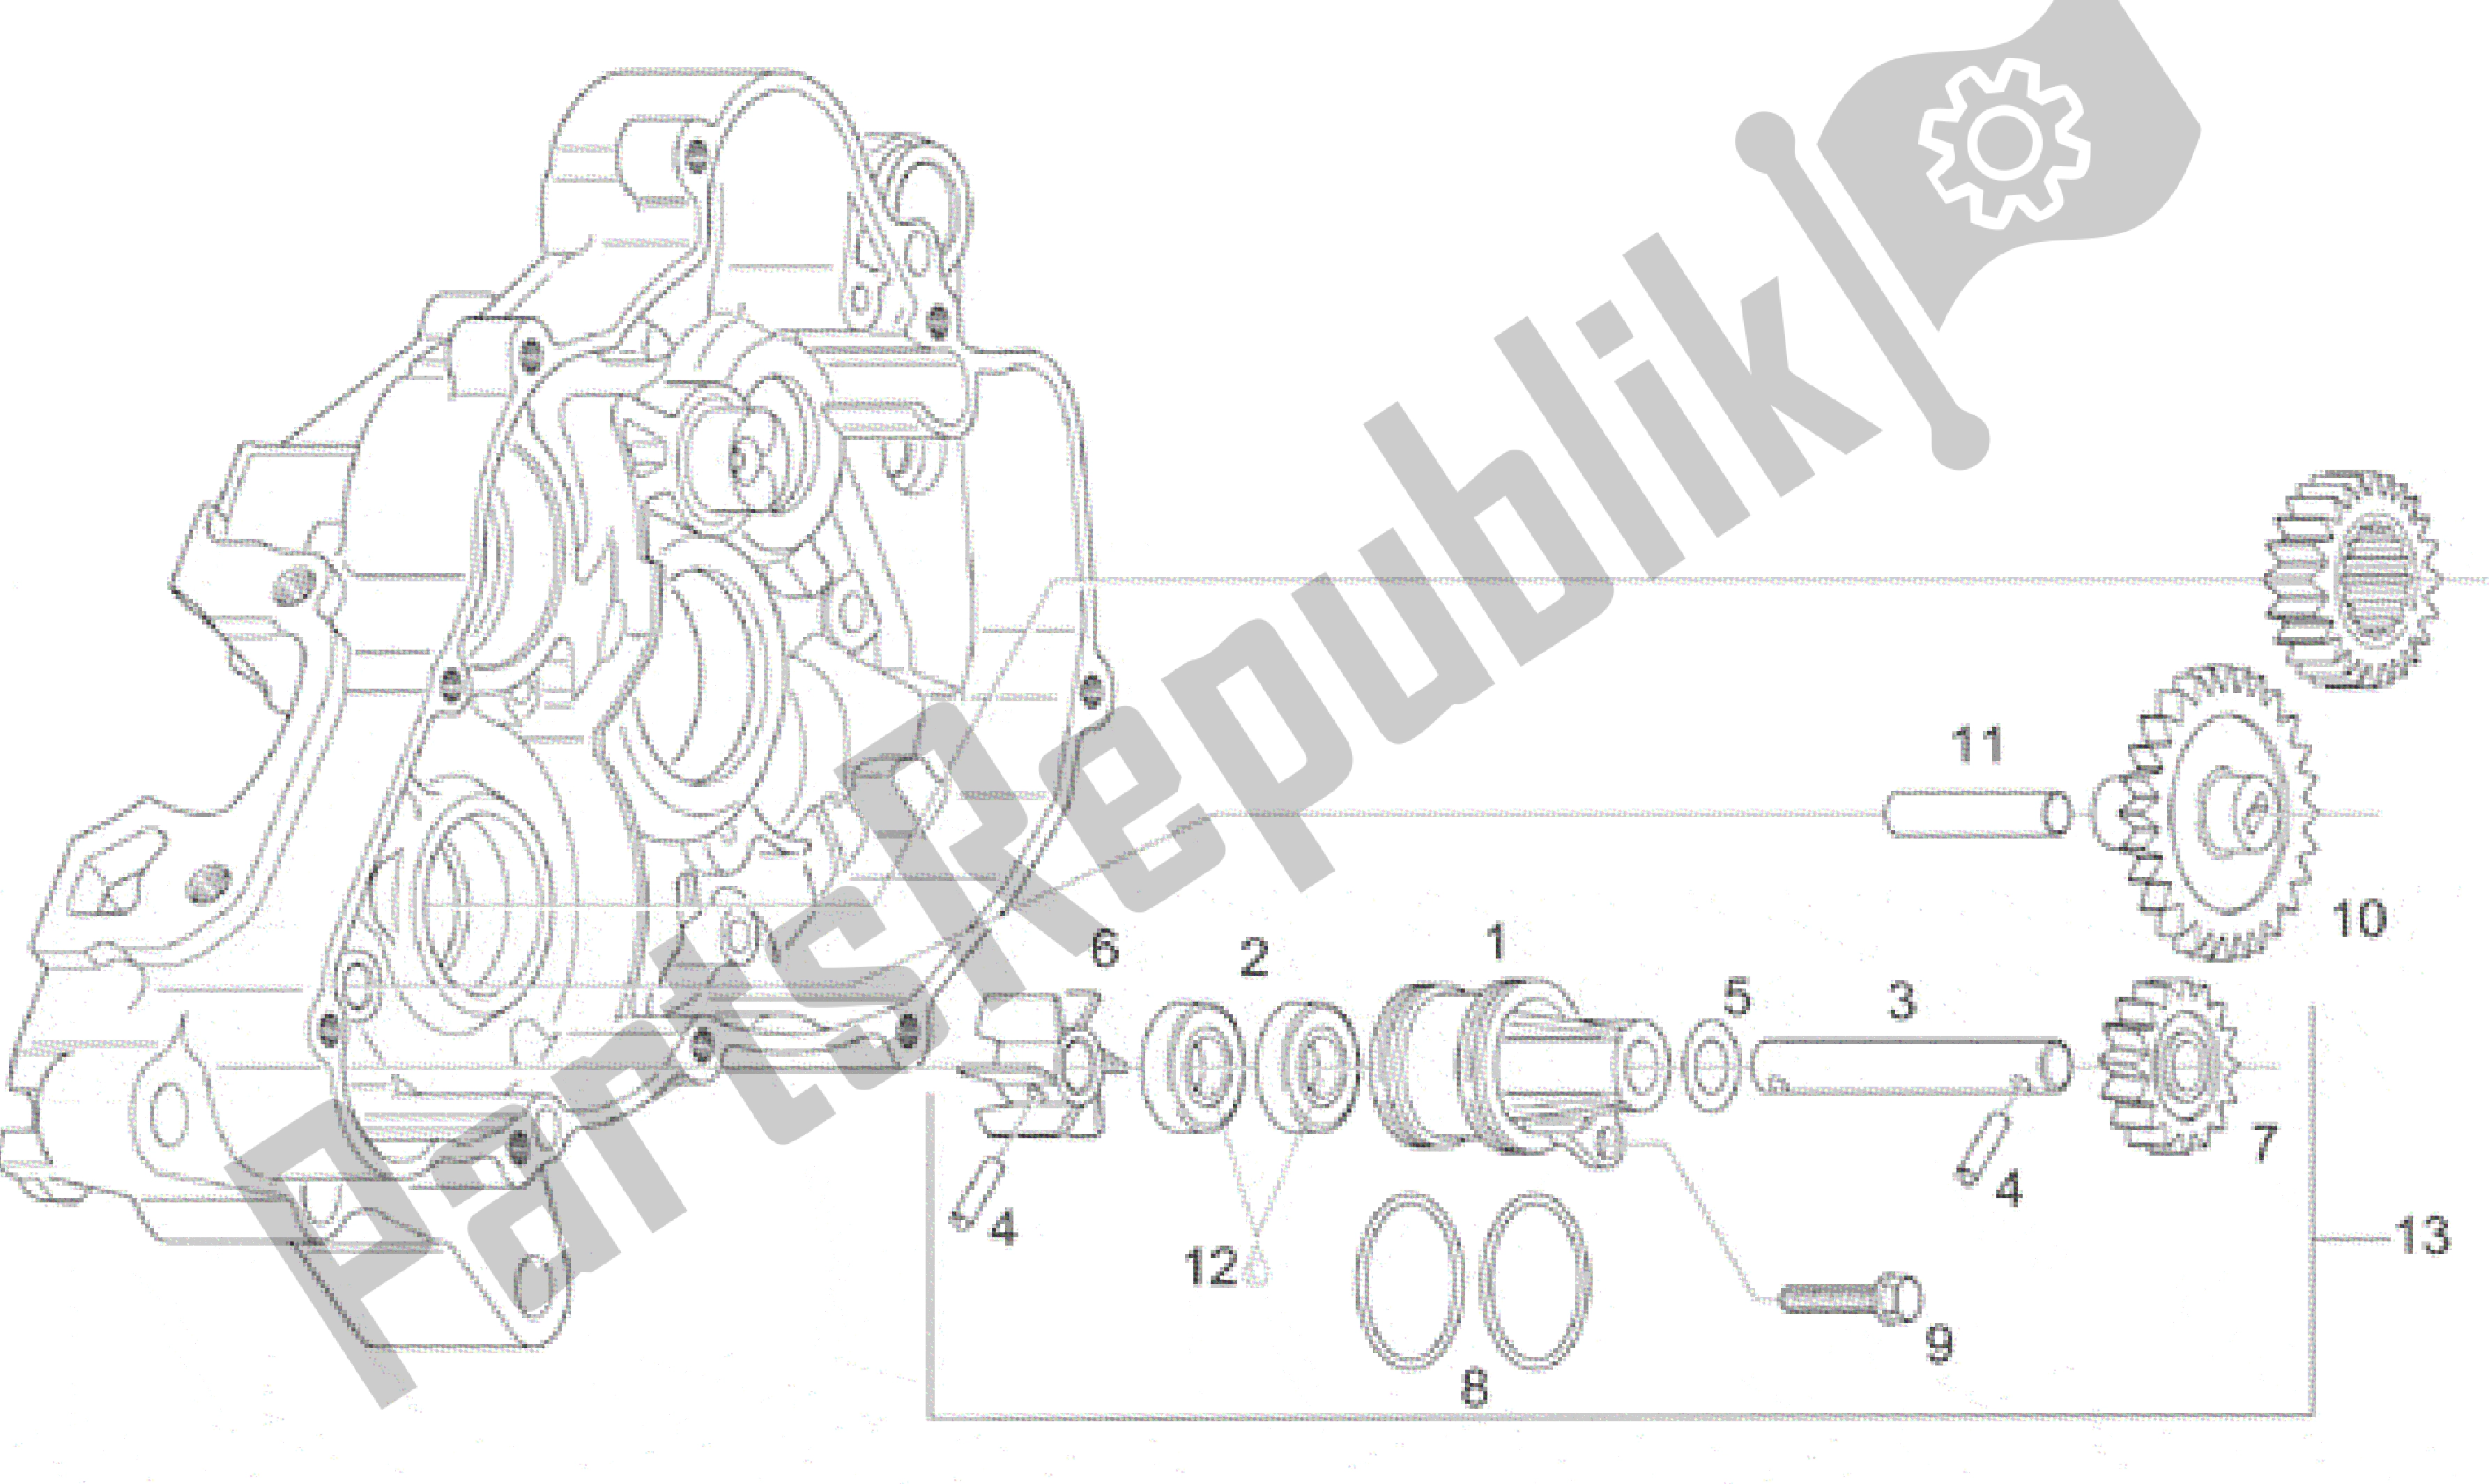 All parts for the Water Pump Assy of the Aprilia RS 125 1996 - 1997